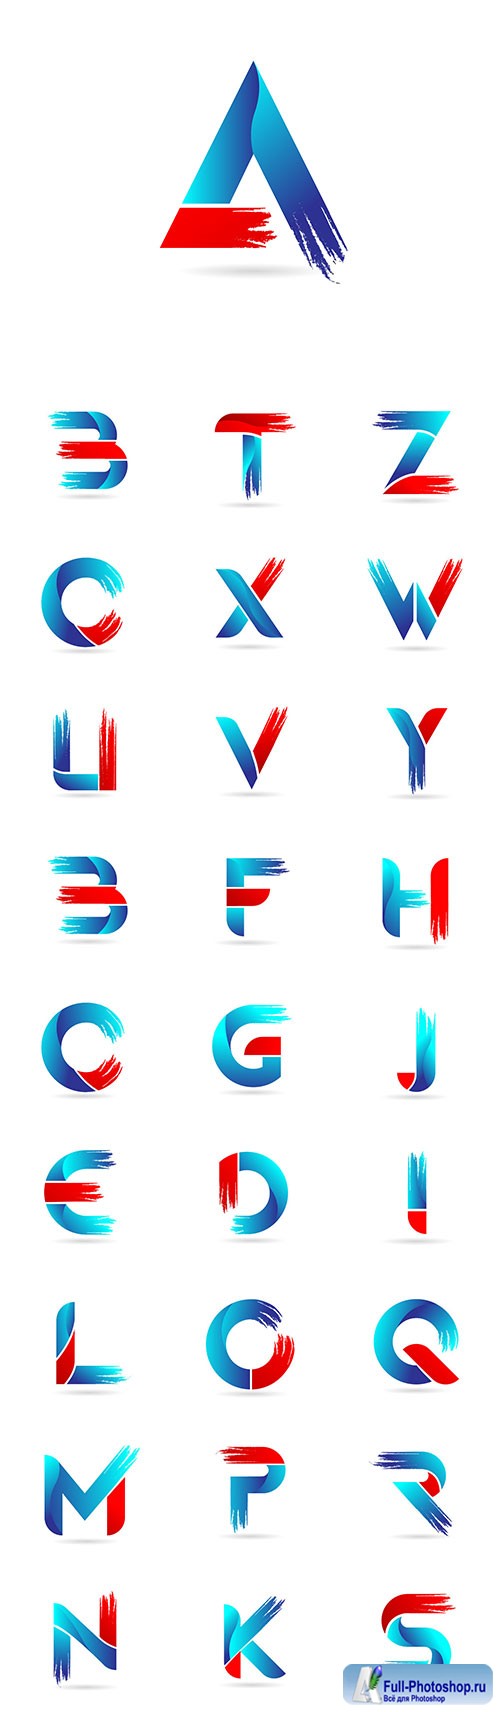 Blue red alphabet letter with grunge brush pattern for company logo icon 